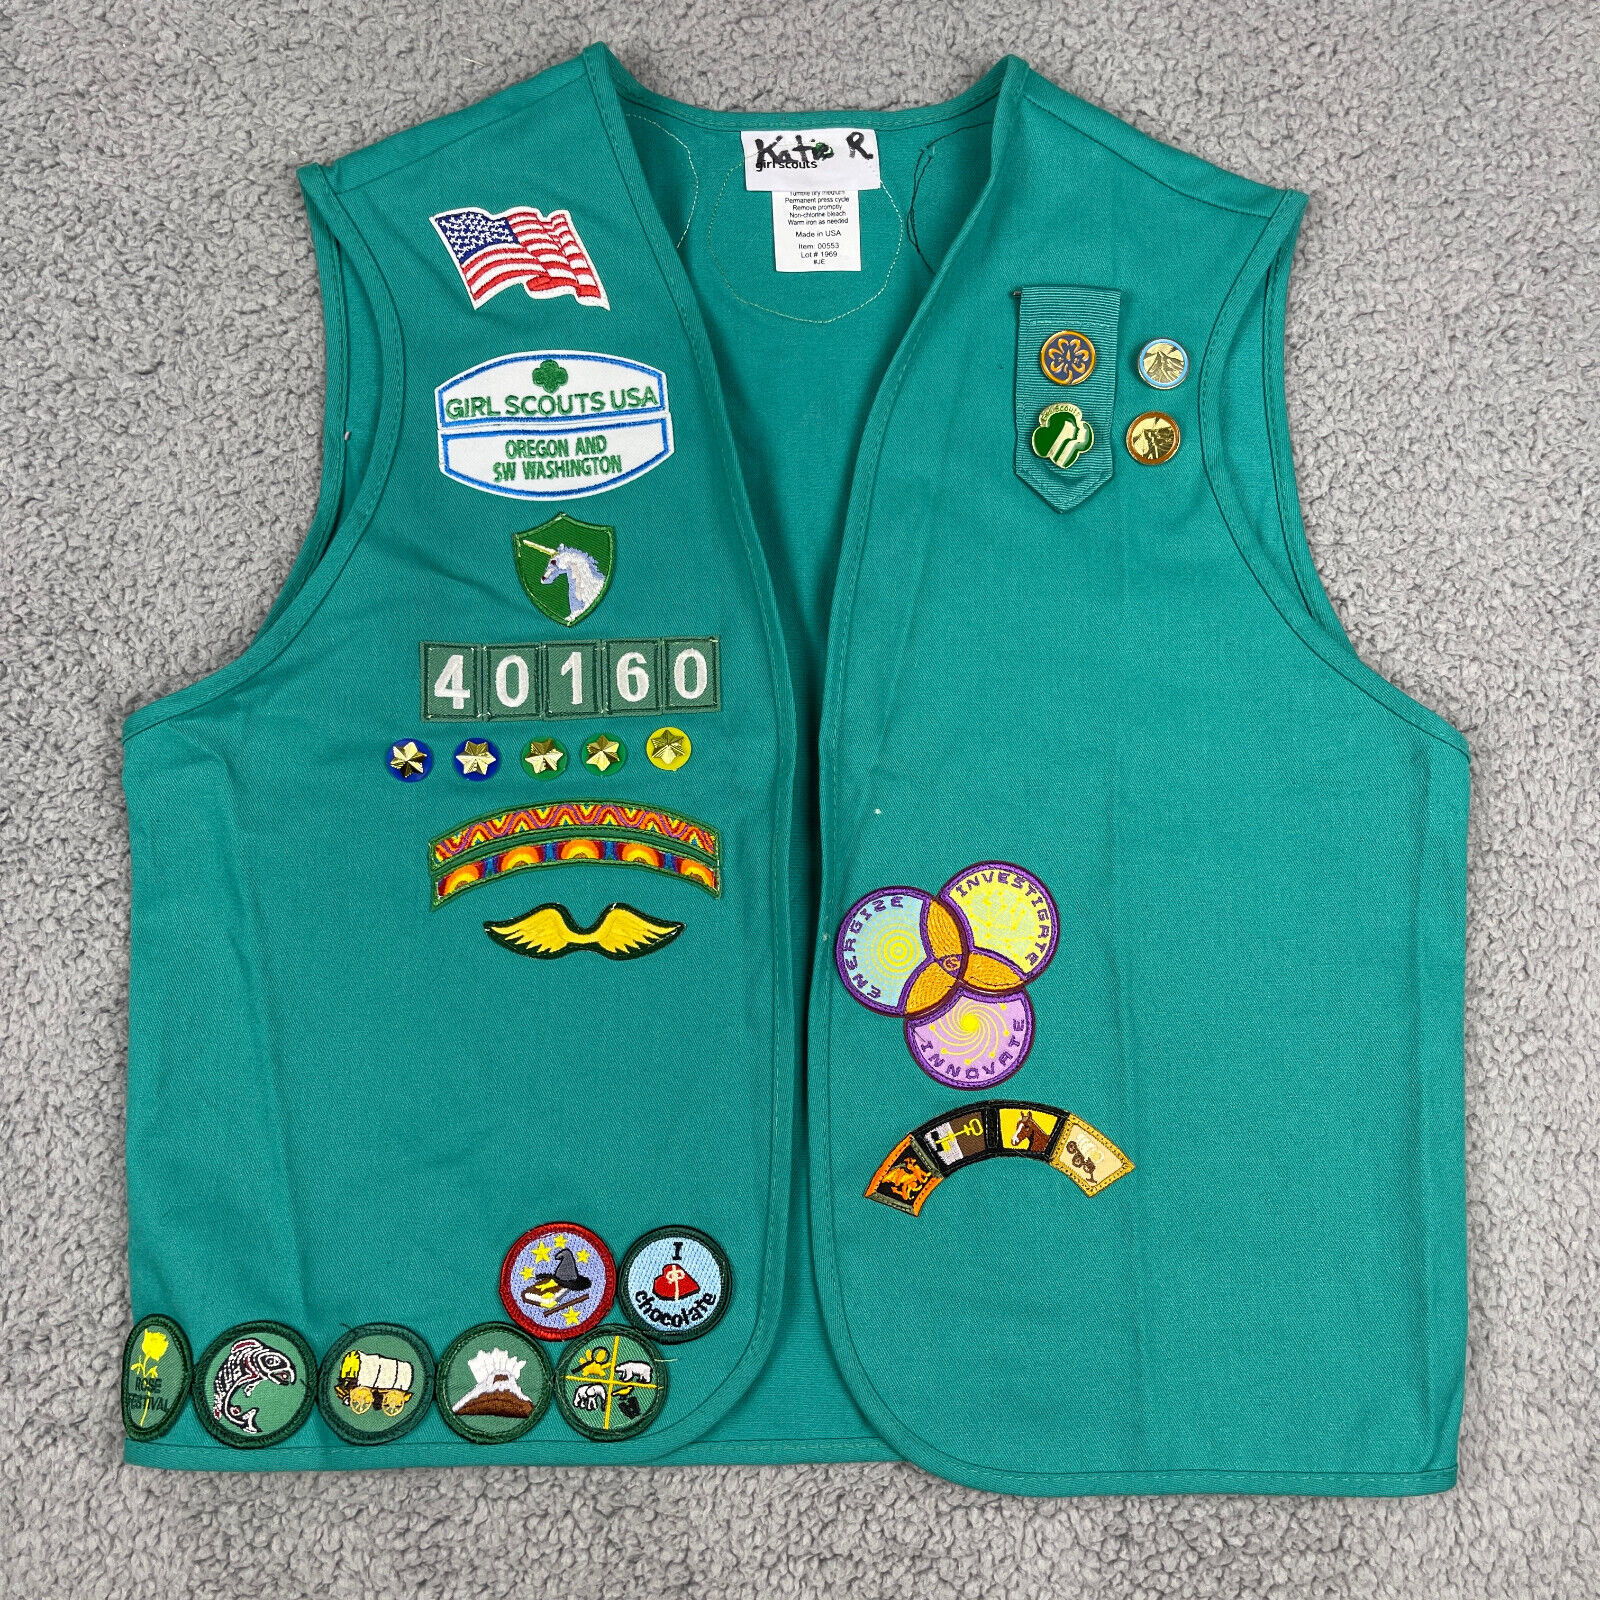 VTG 2000's Junior Girl Scout Green Vest With Patches & Pins Large (14-16)